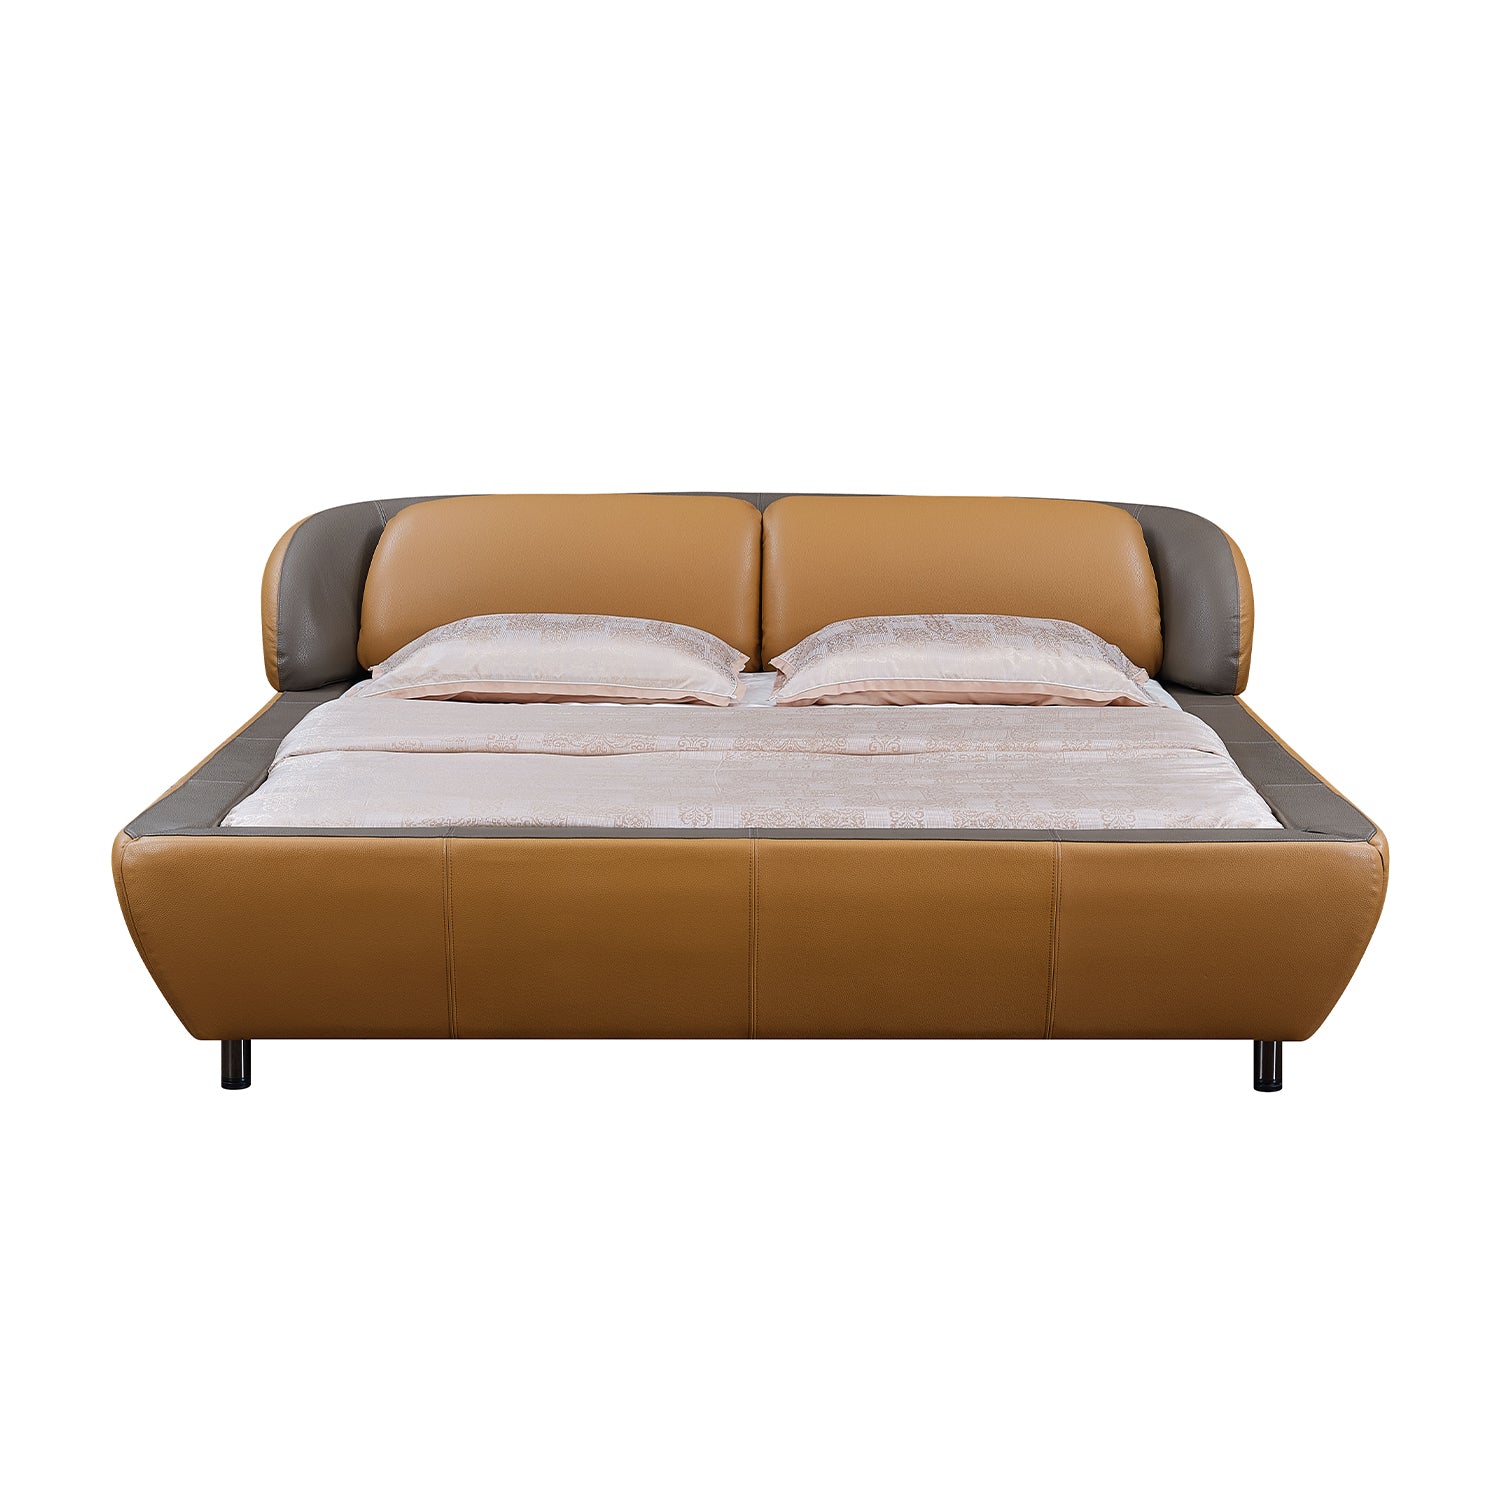 DeRUCCI Bed Frame BZZ4-090 in bold orange and ash gray color scheme with a sleek, modern design inspired by a magpie's nest